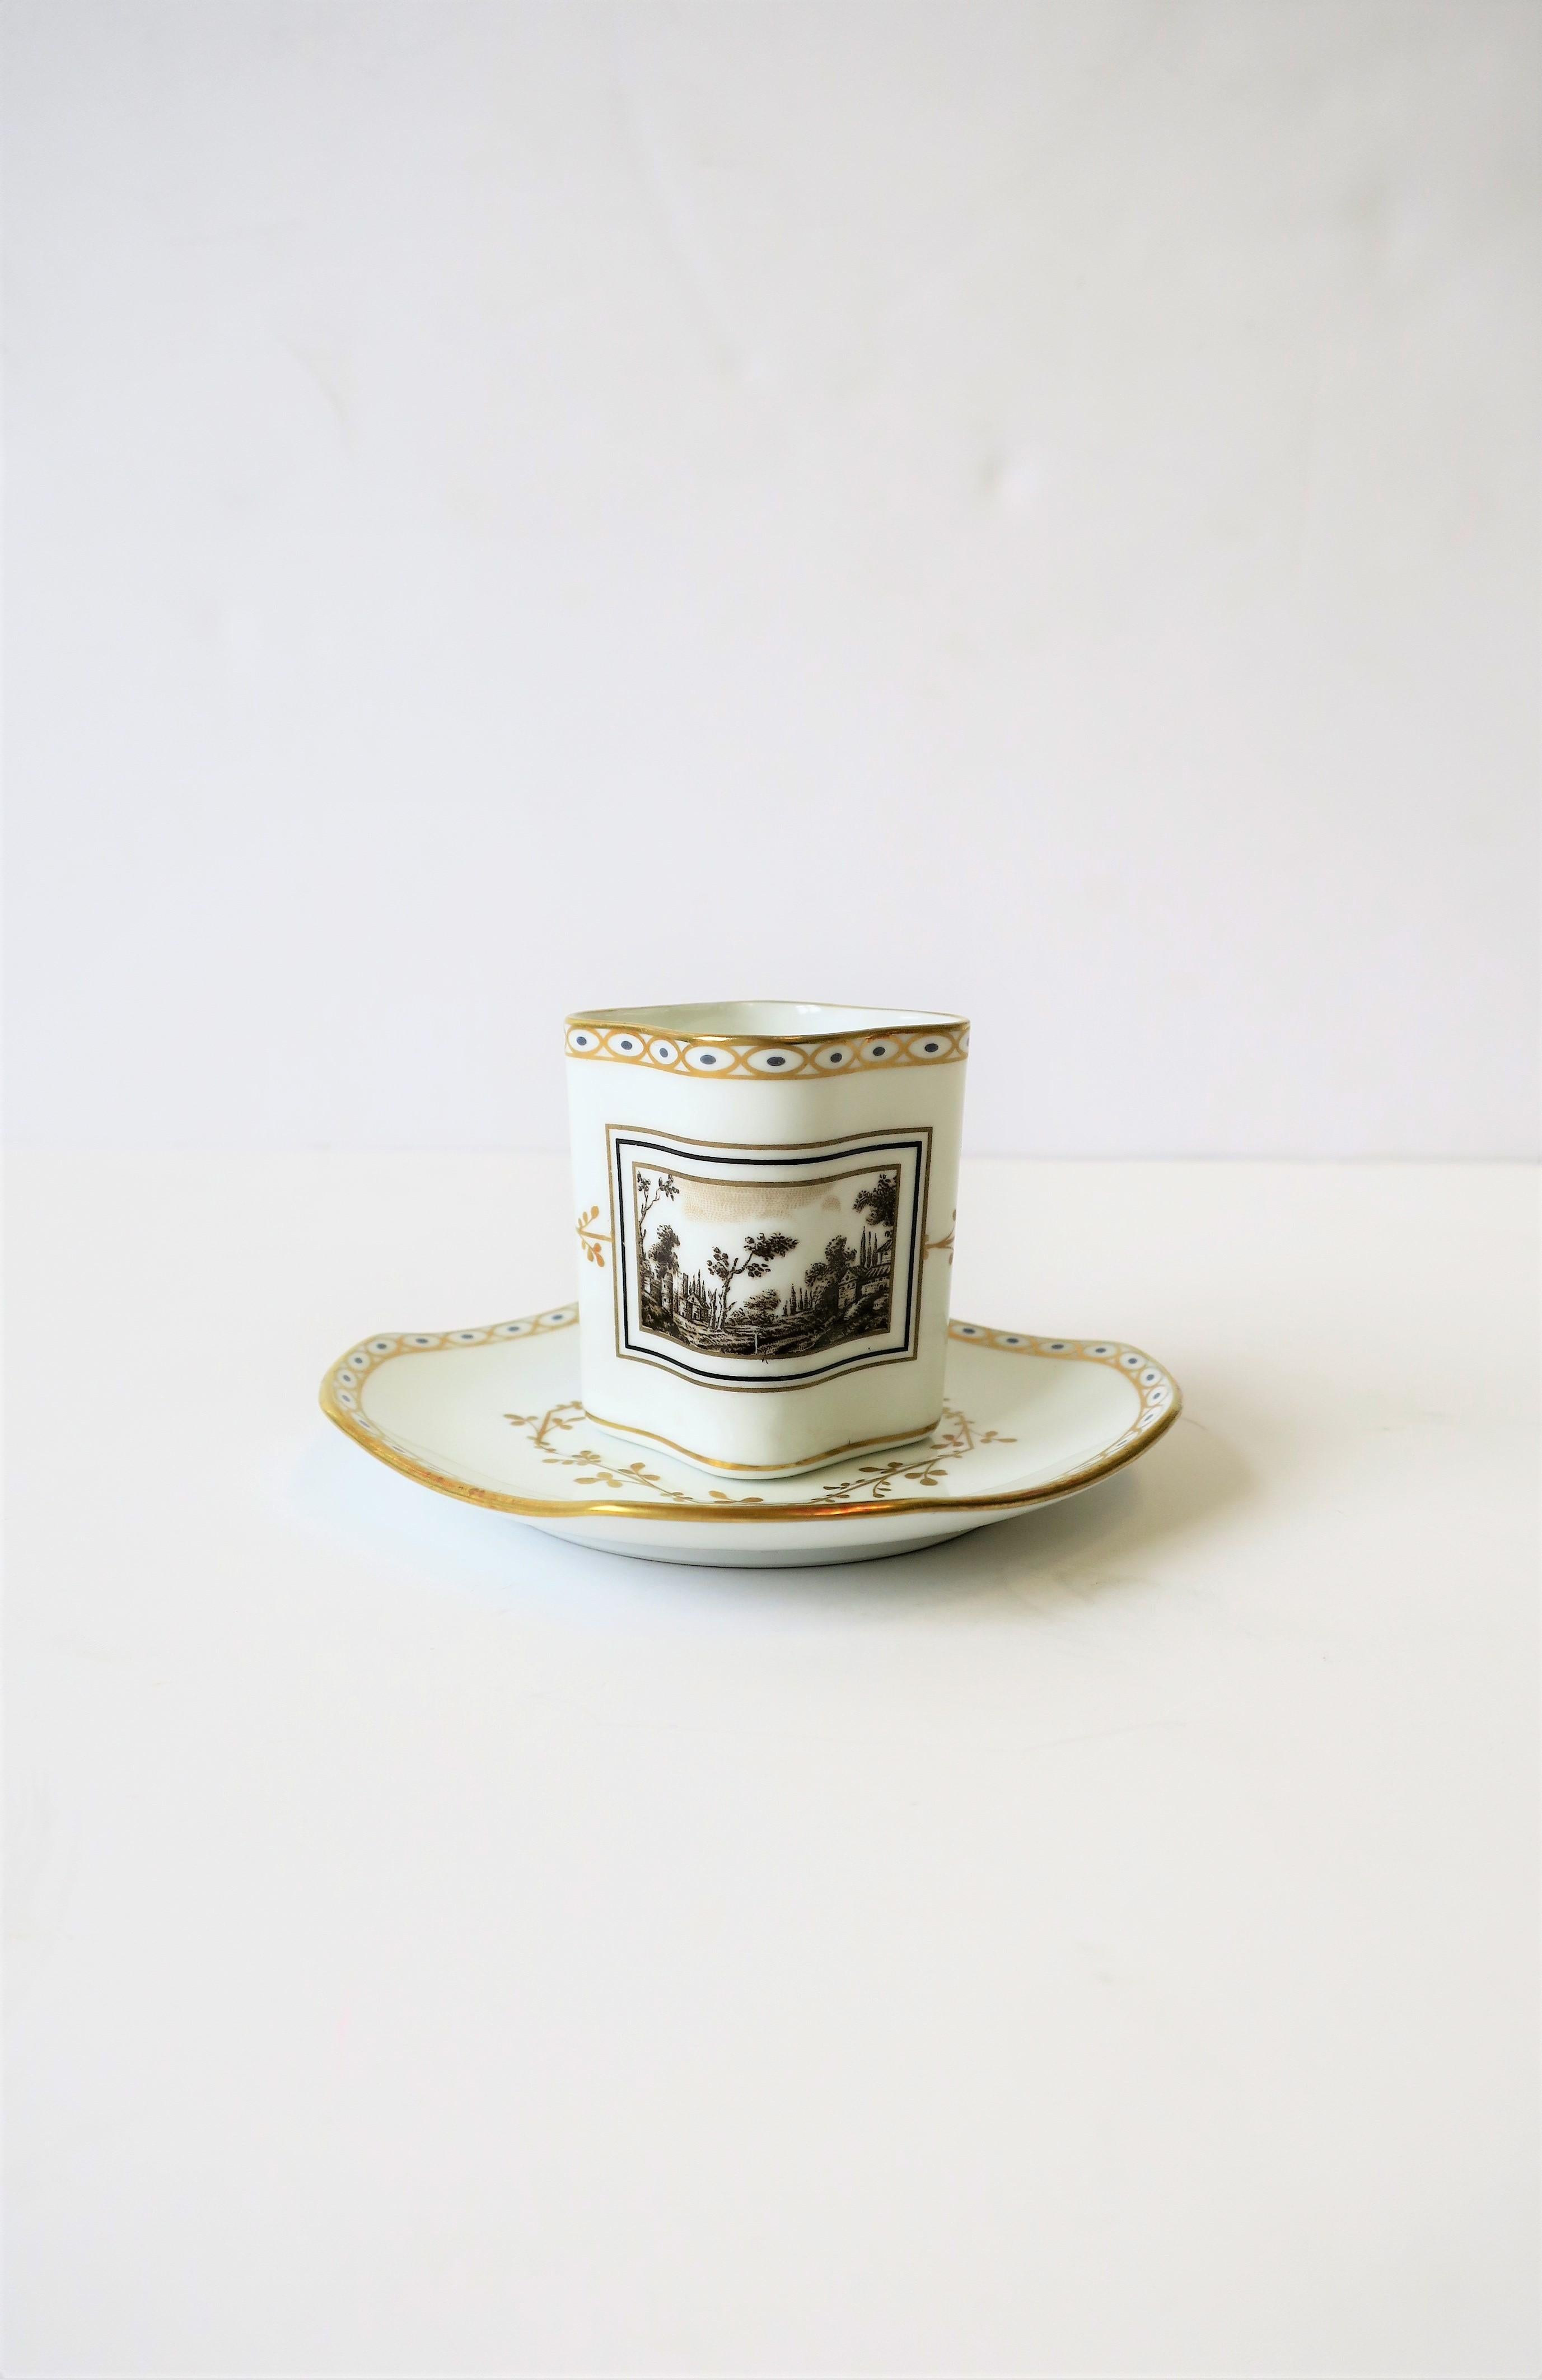 A beautiful Italian espresso coffee or tea demitasse cup and saucer 'Toscana' by designer Richard Ginori, circa mid-20th century, Italy. Porcelain cup and saucer have beautiful shape and decorative raised detail; gold and blue around edge, and